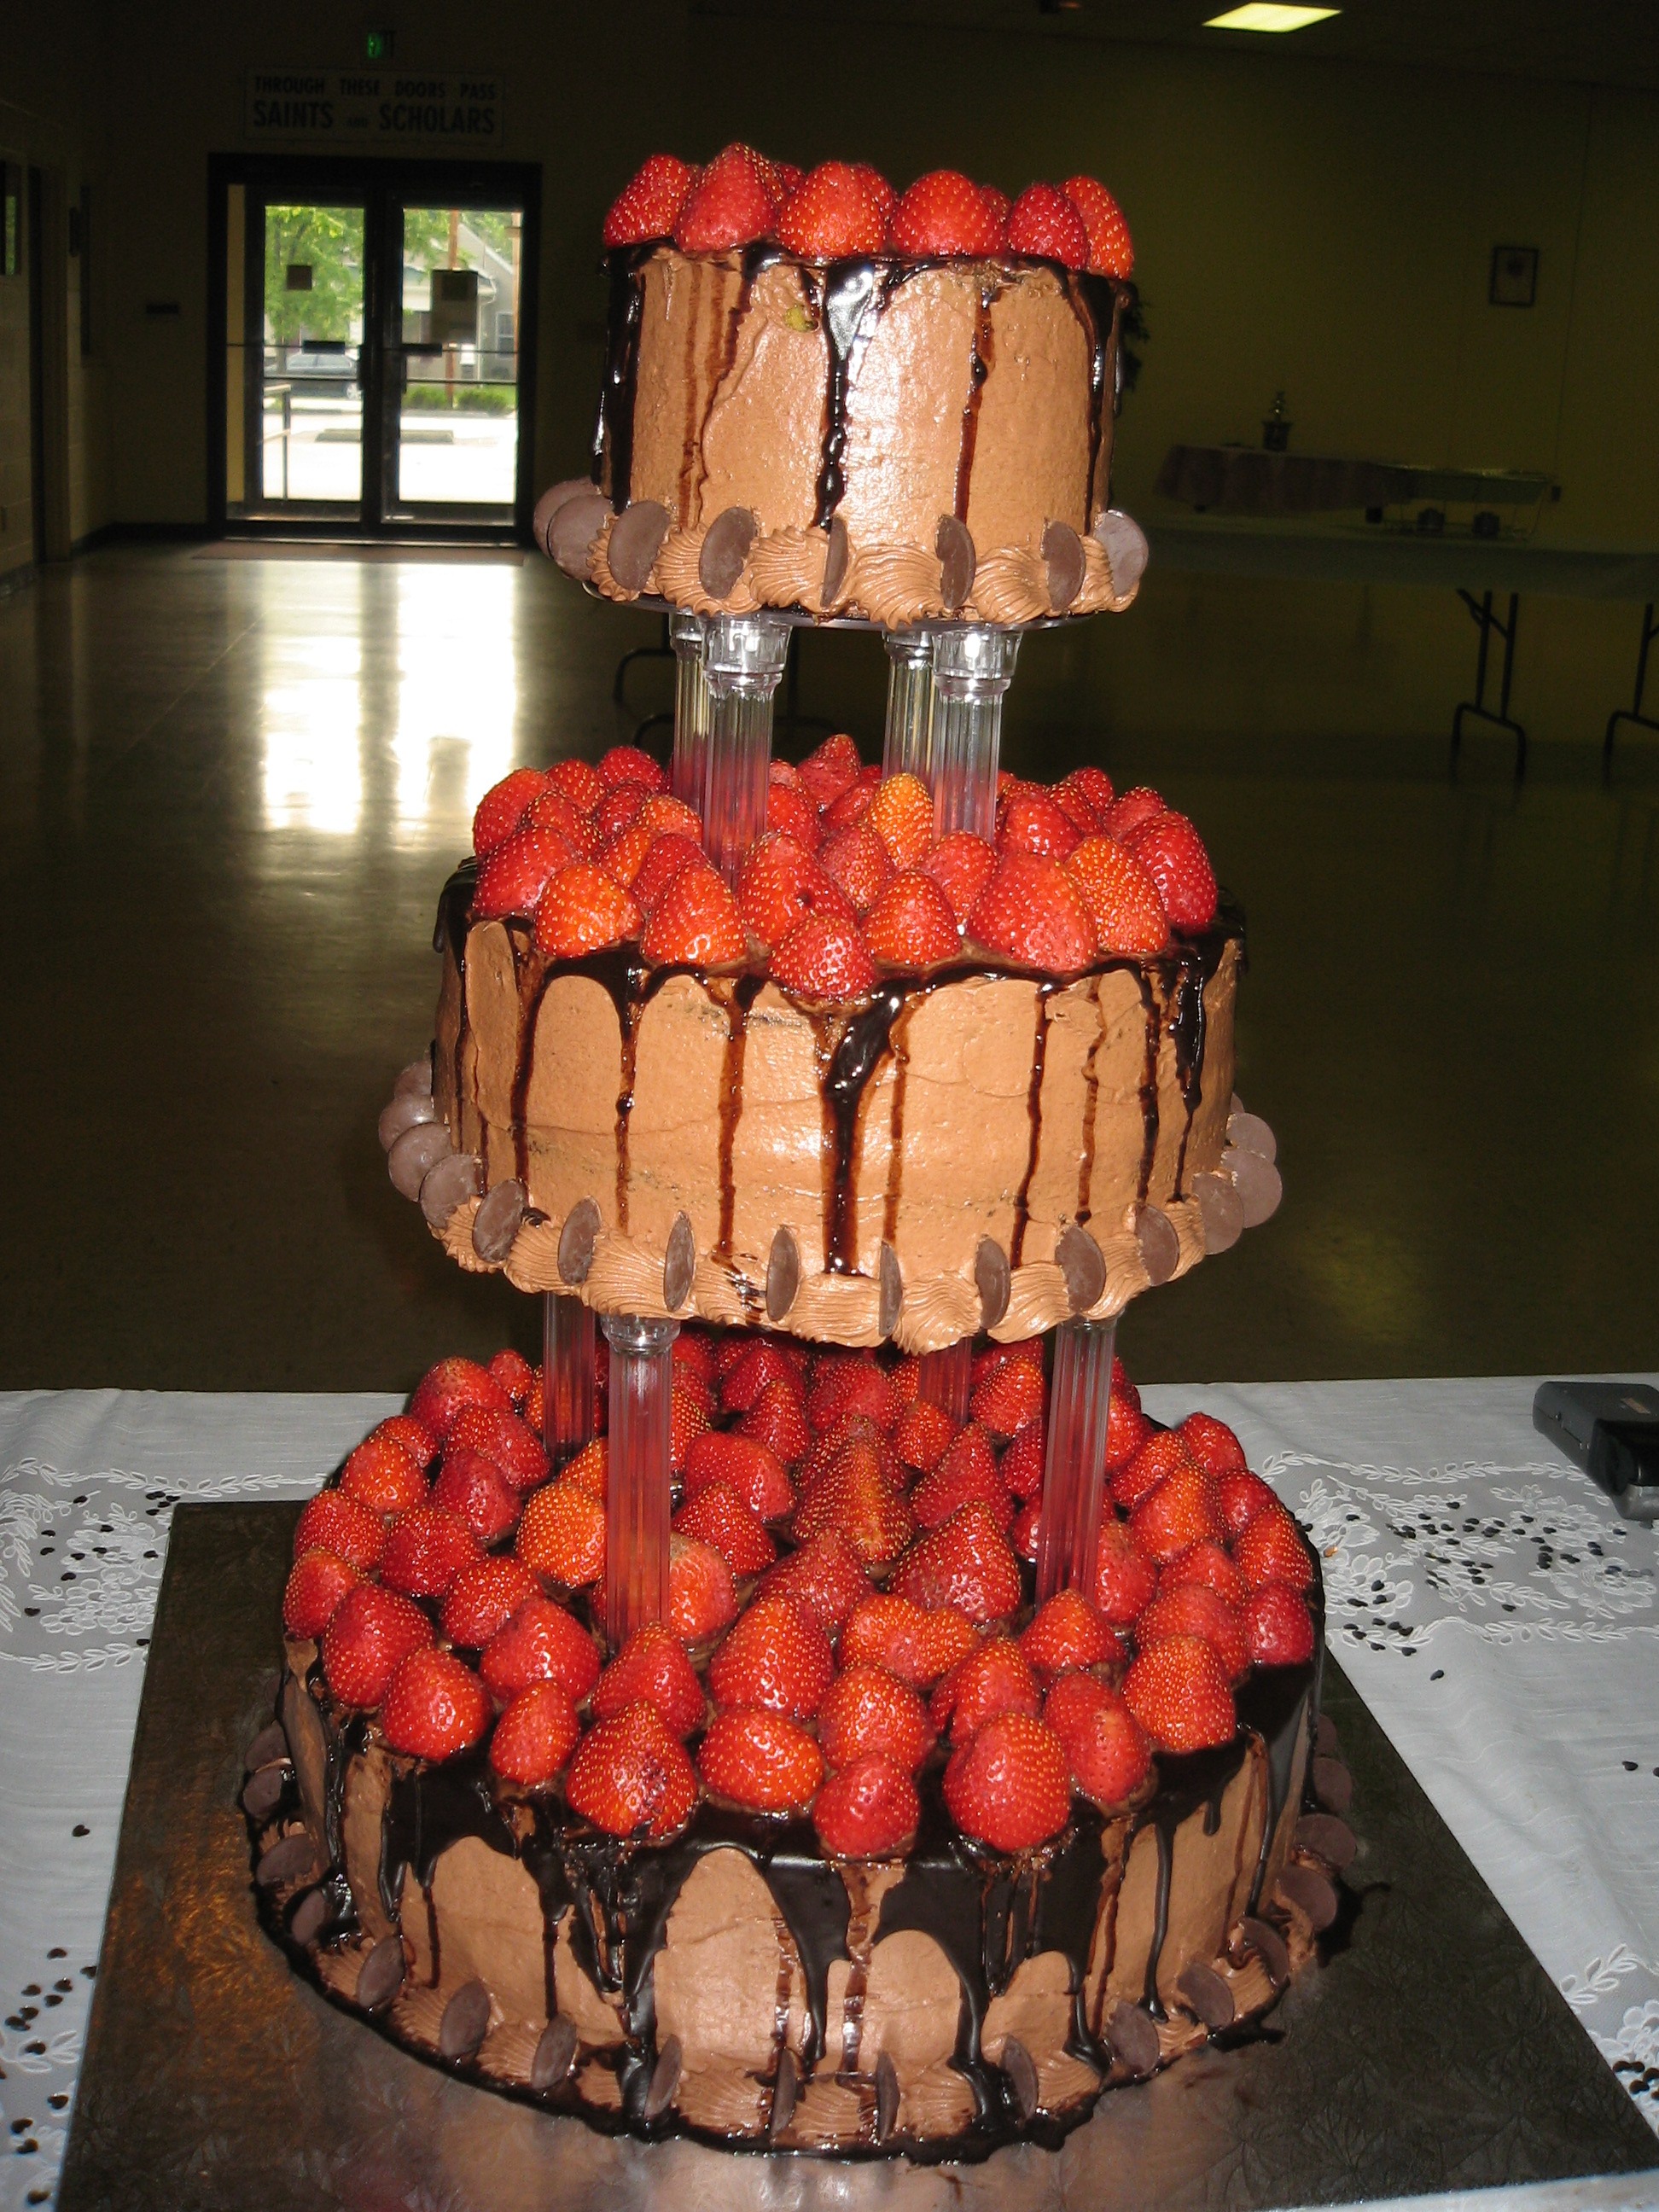 3-Tier Floating Chocolate Round with Strawberries